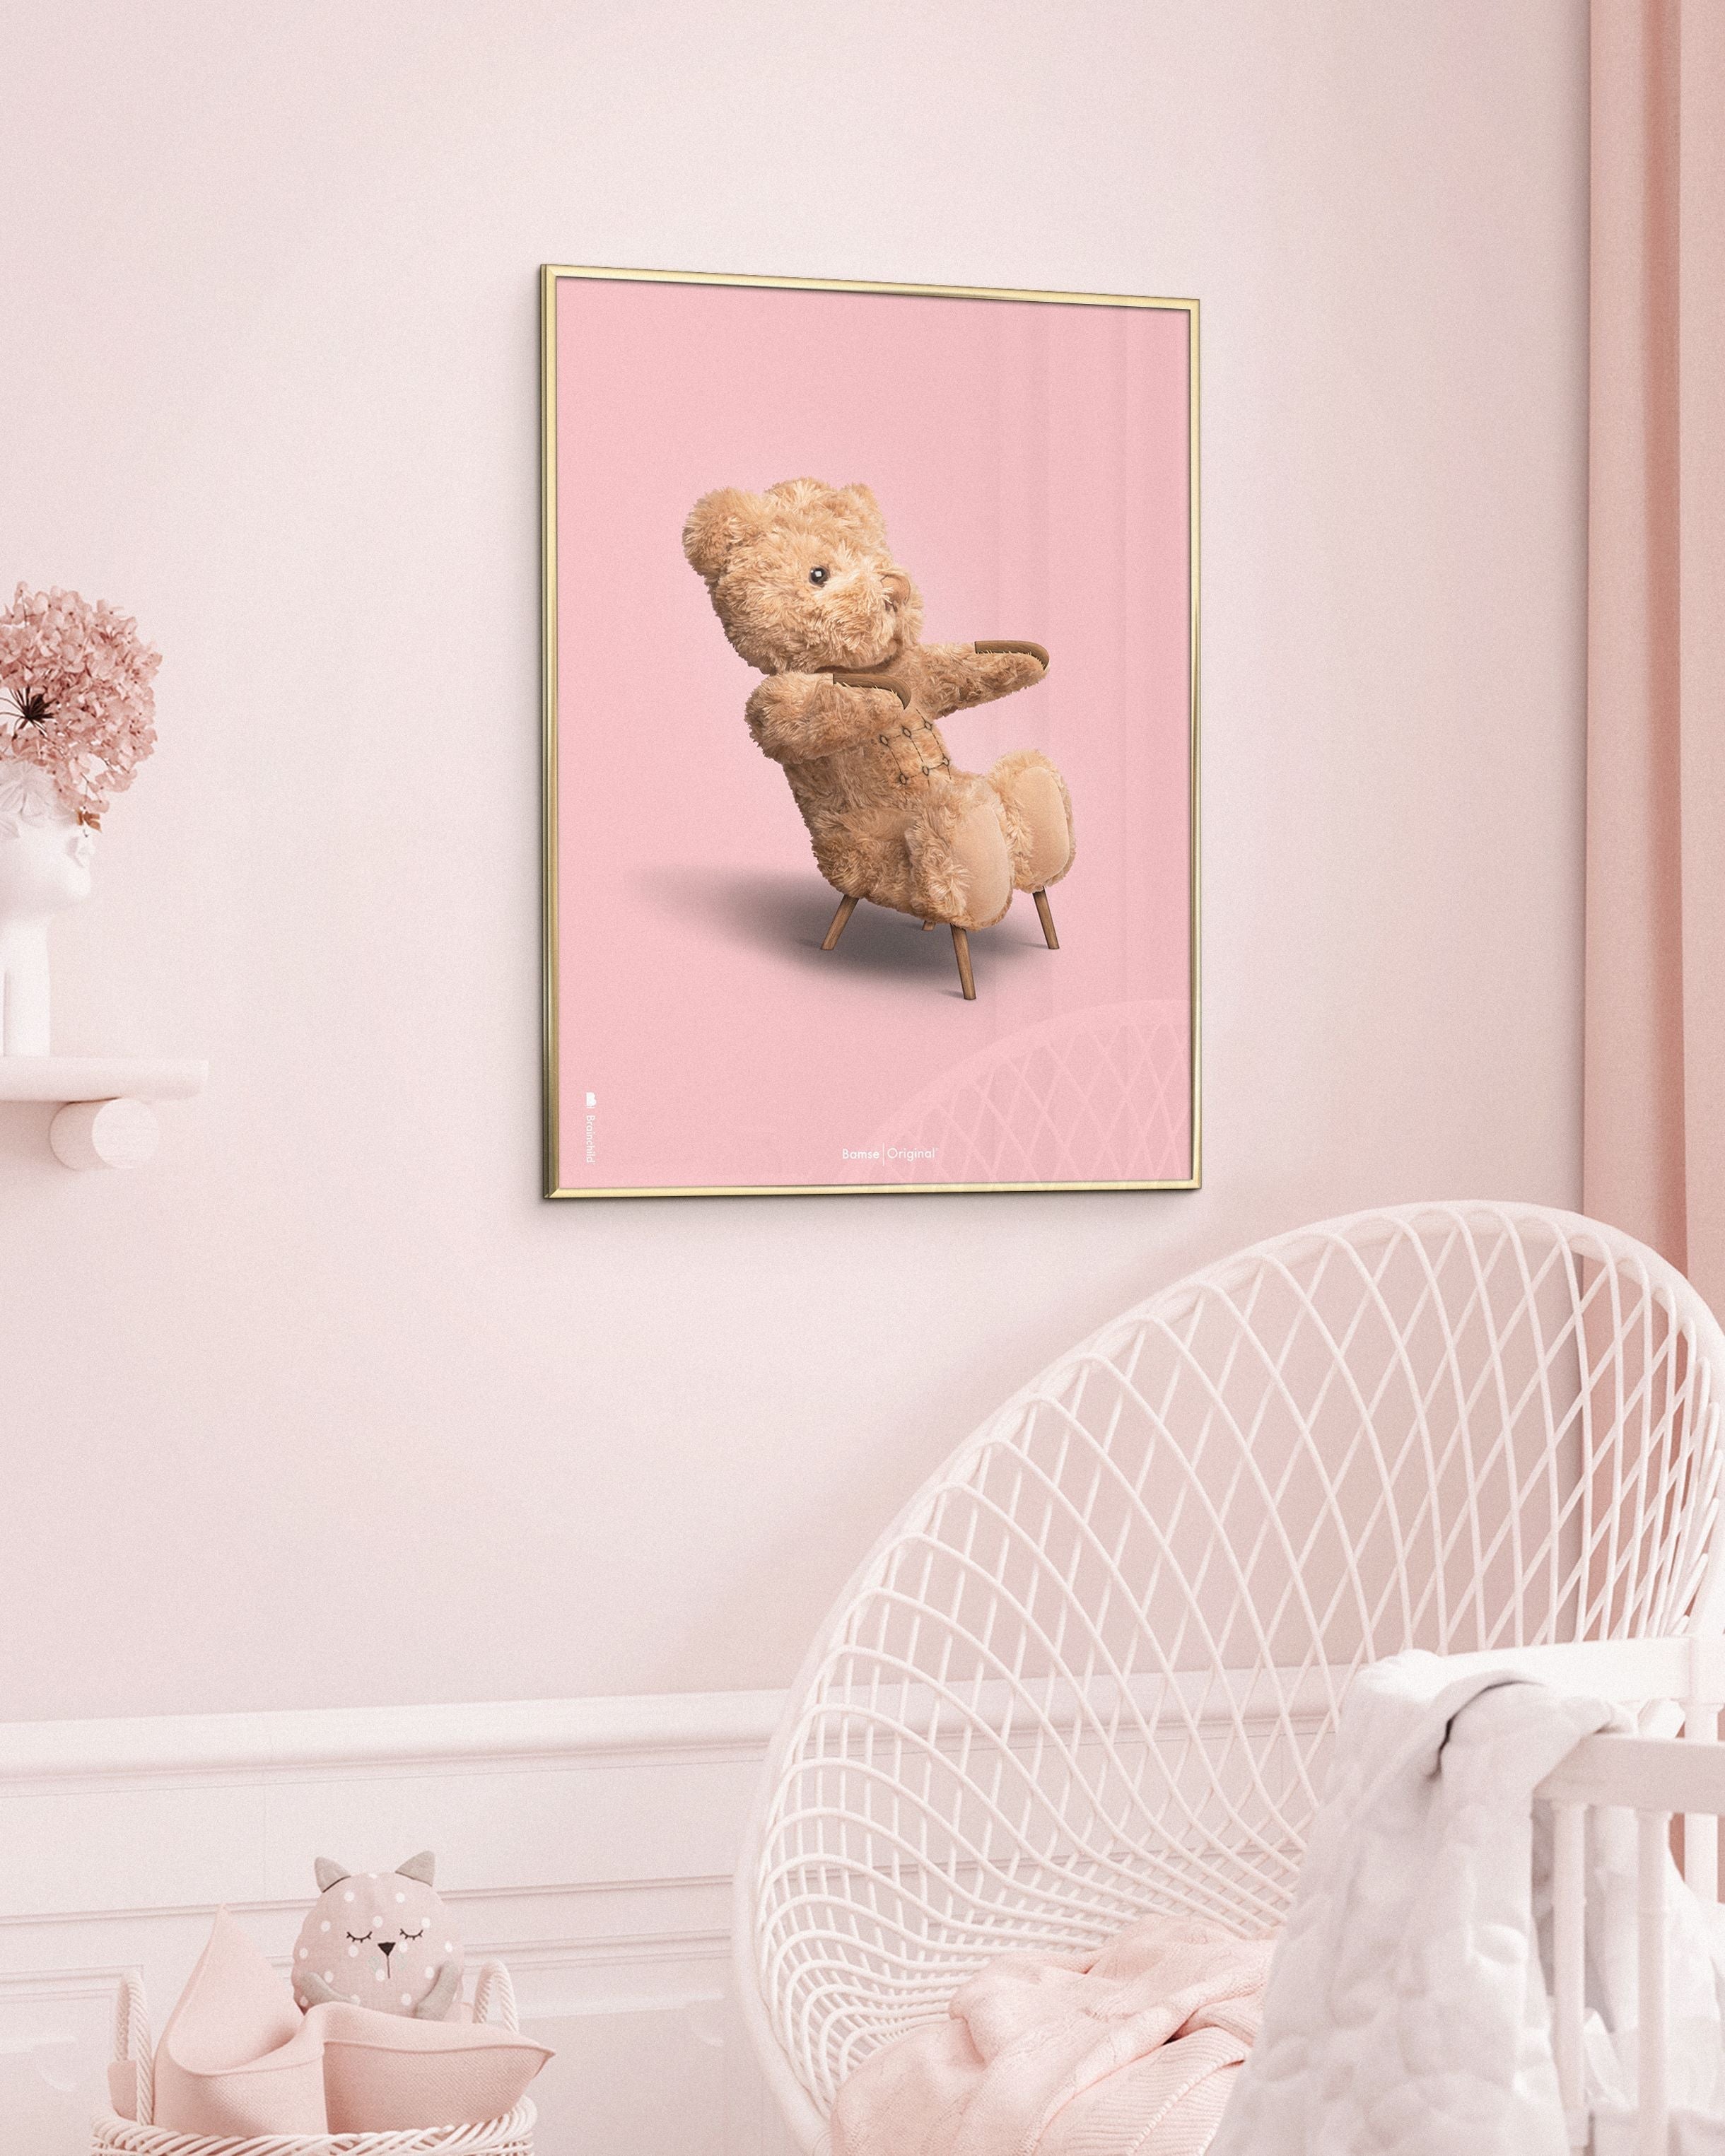 Brainchild Teddy Bear Classic Poster Without Frame 50x70 Cm, Pink Background